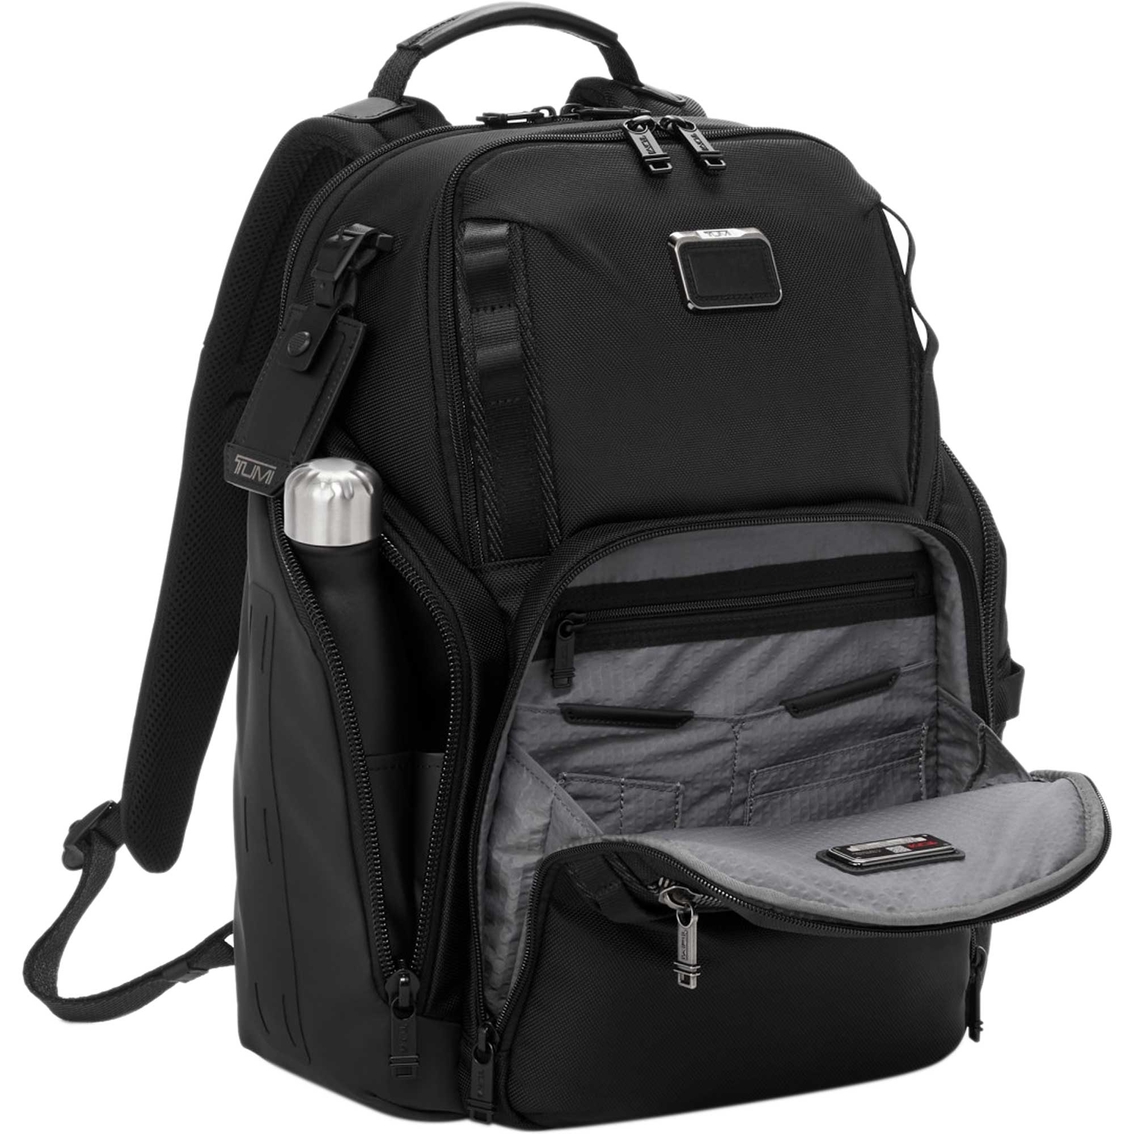 Tumi Search Backpack, Black - Image 5 of 6